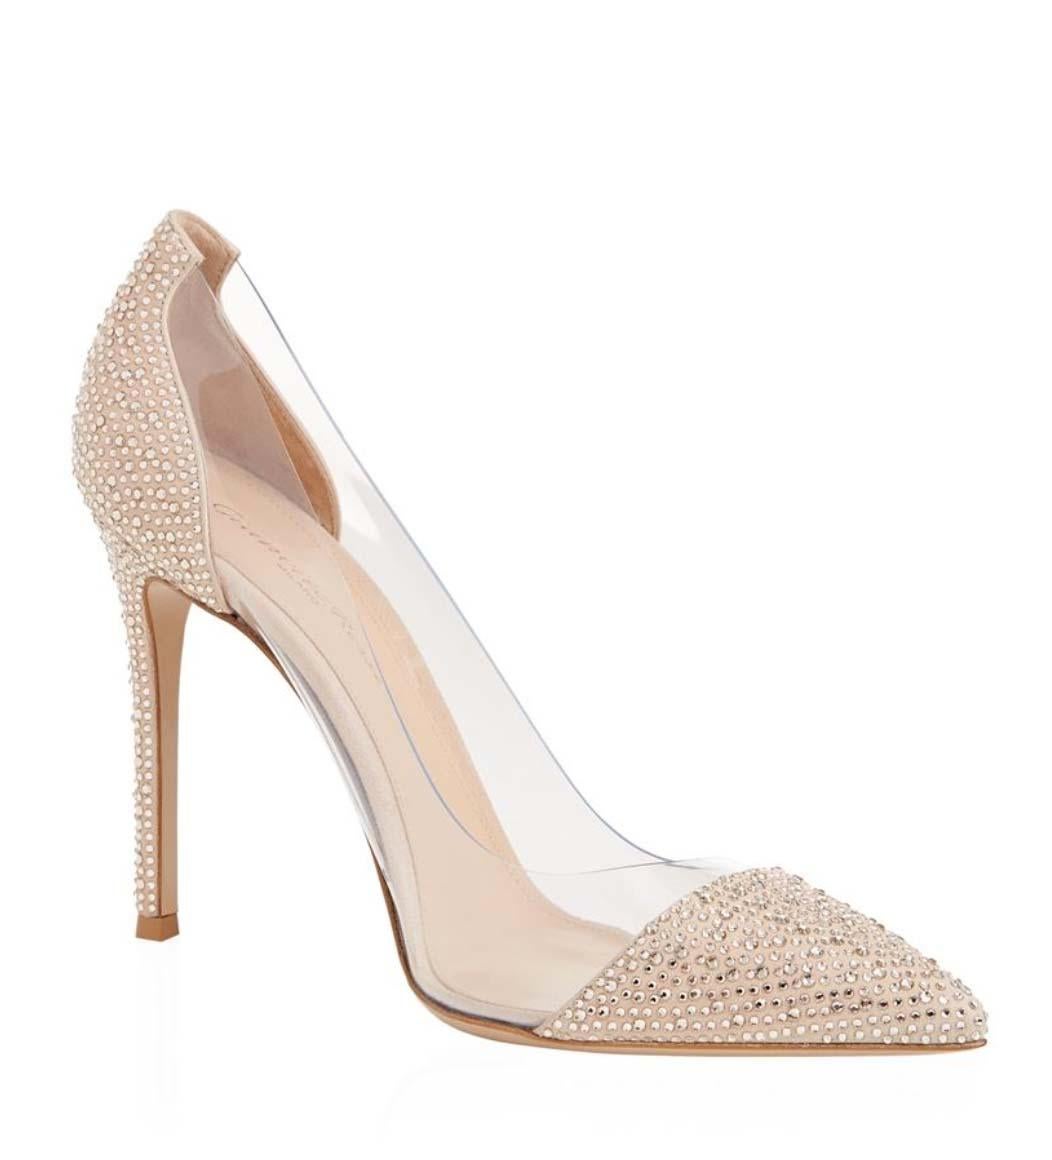 Gianvito Rossi Calabria Crystal-Embellished Pumps